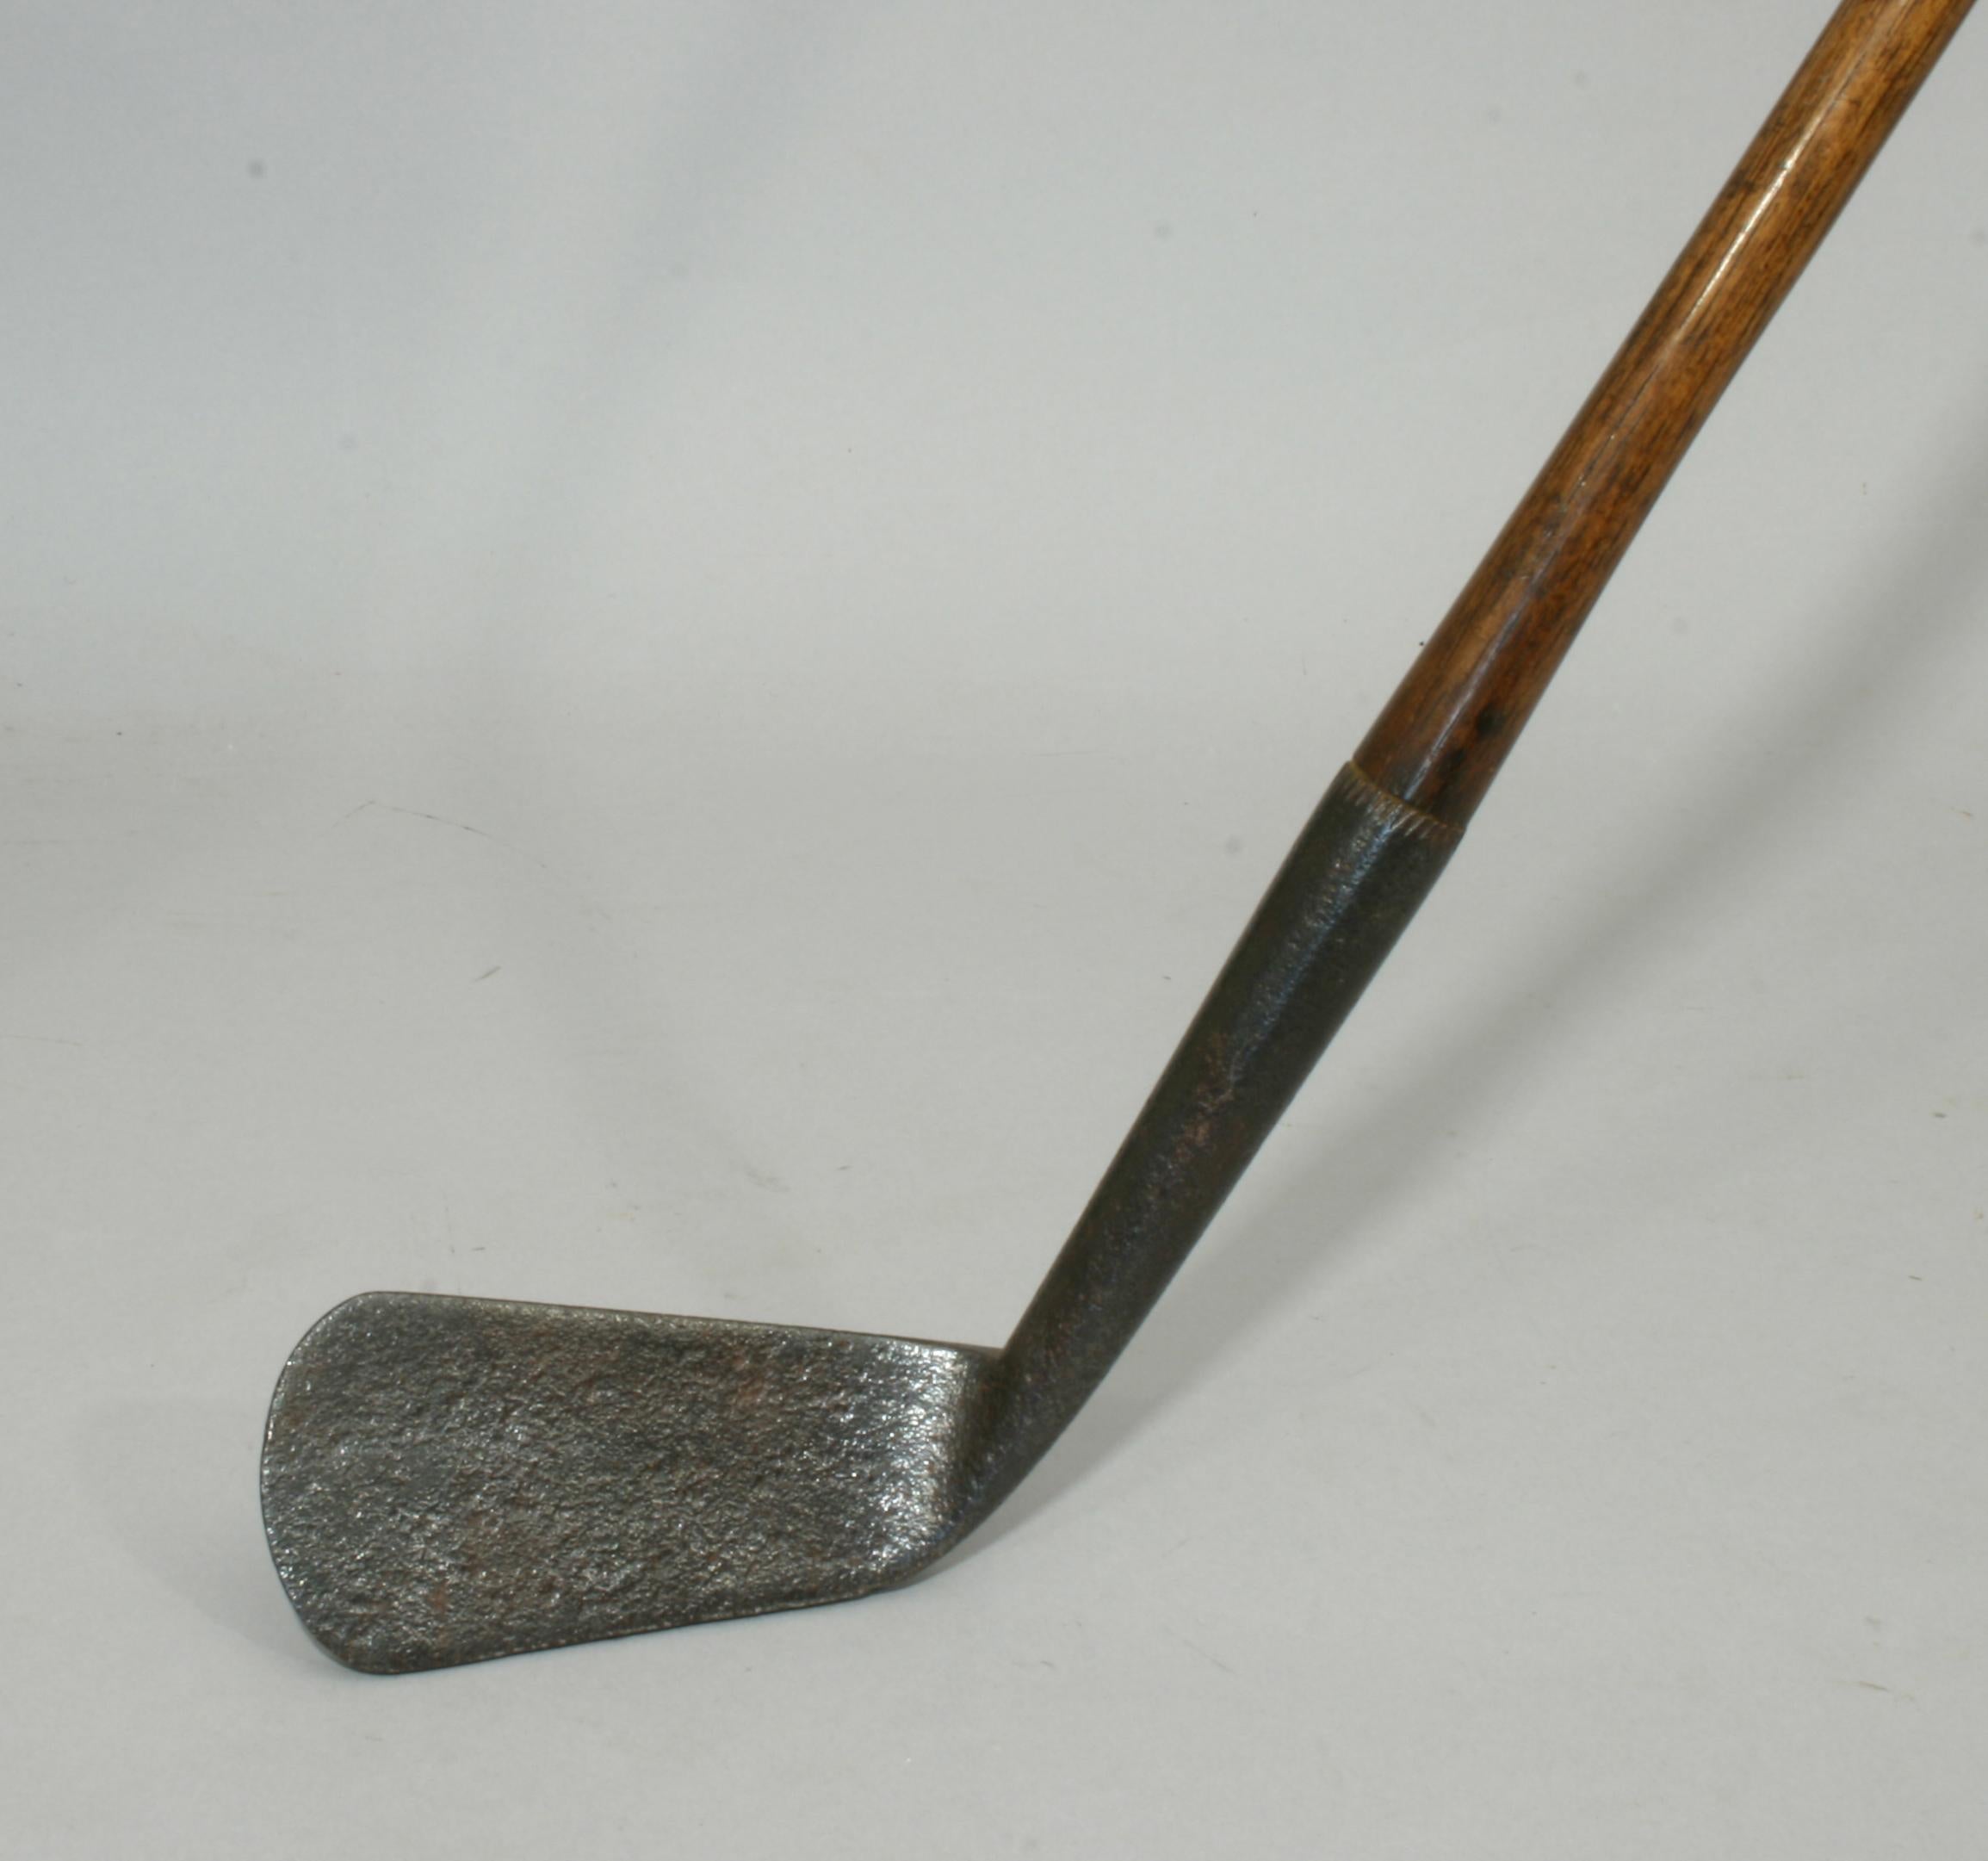 British Vintage Hickory Shafted Golf Club, Large Smooth Face Iron